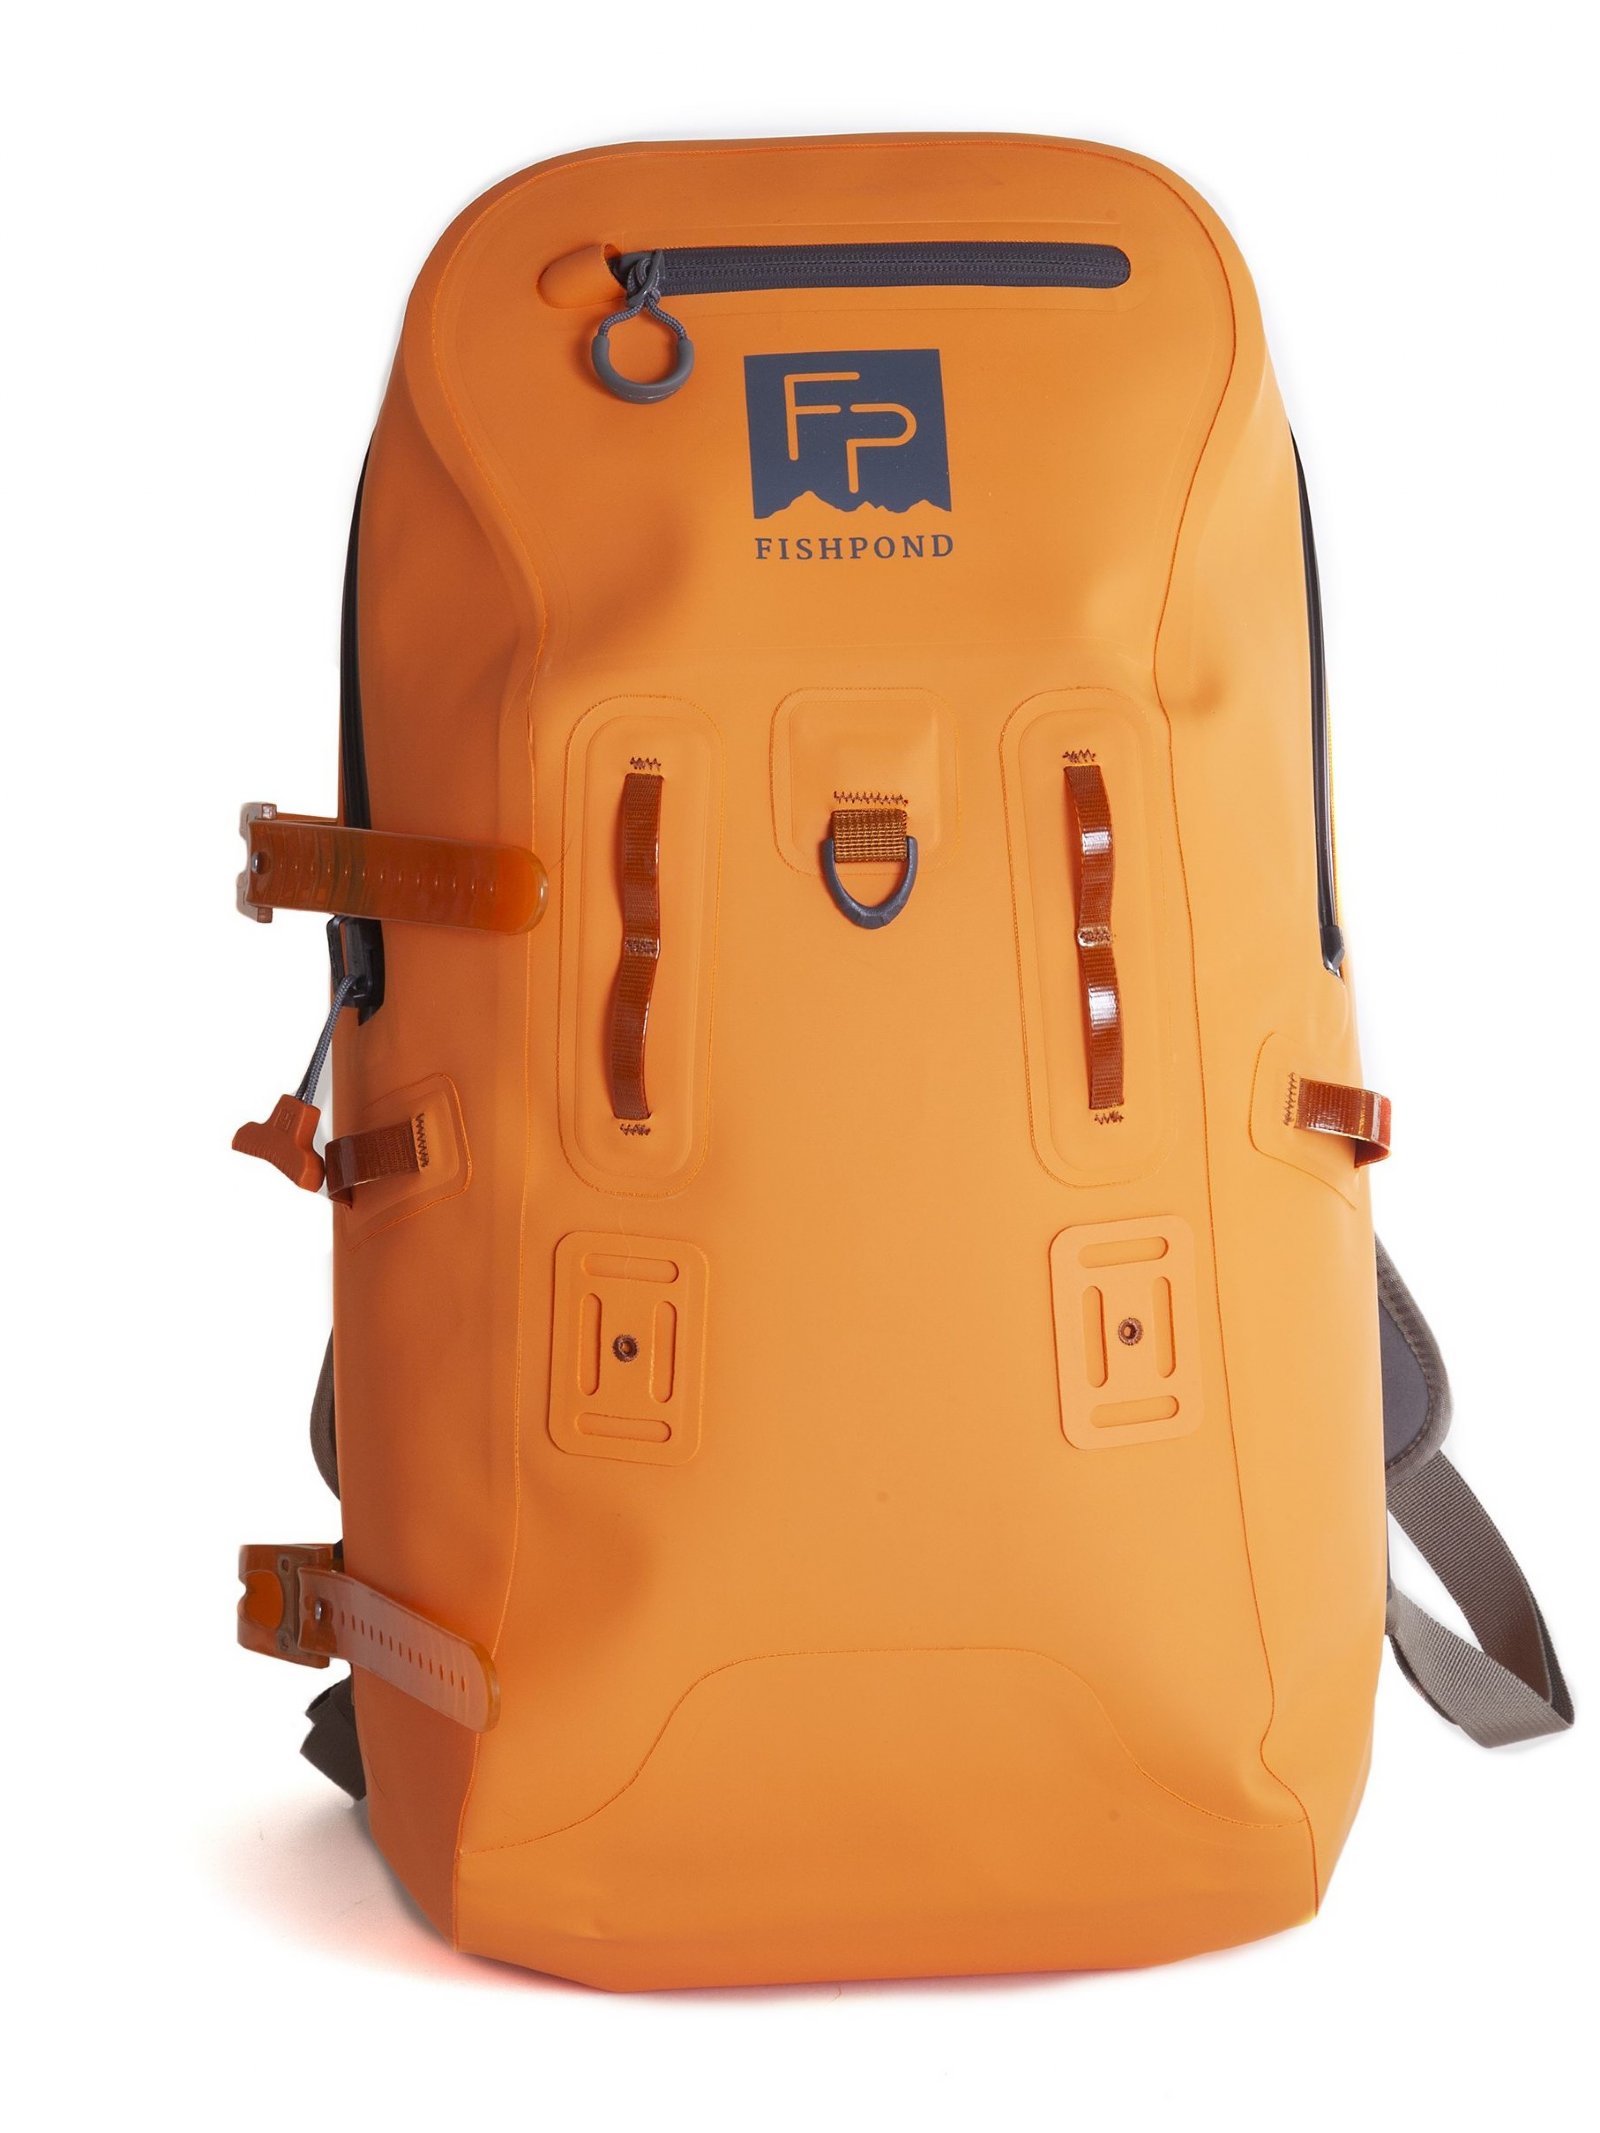 NEW FISHPOND THUNDERHEAD SUBMERSIBLE BACKPACK IN ORANGE FREE US SHIPPING 